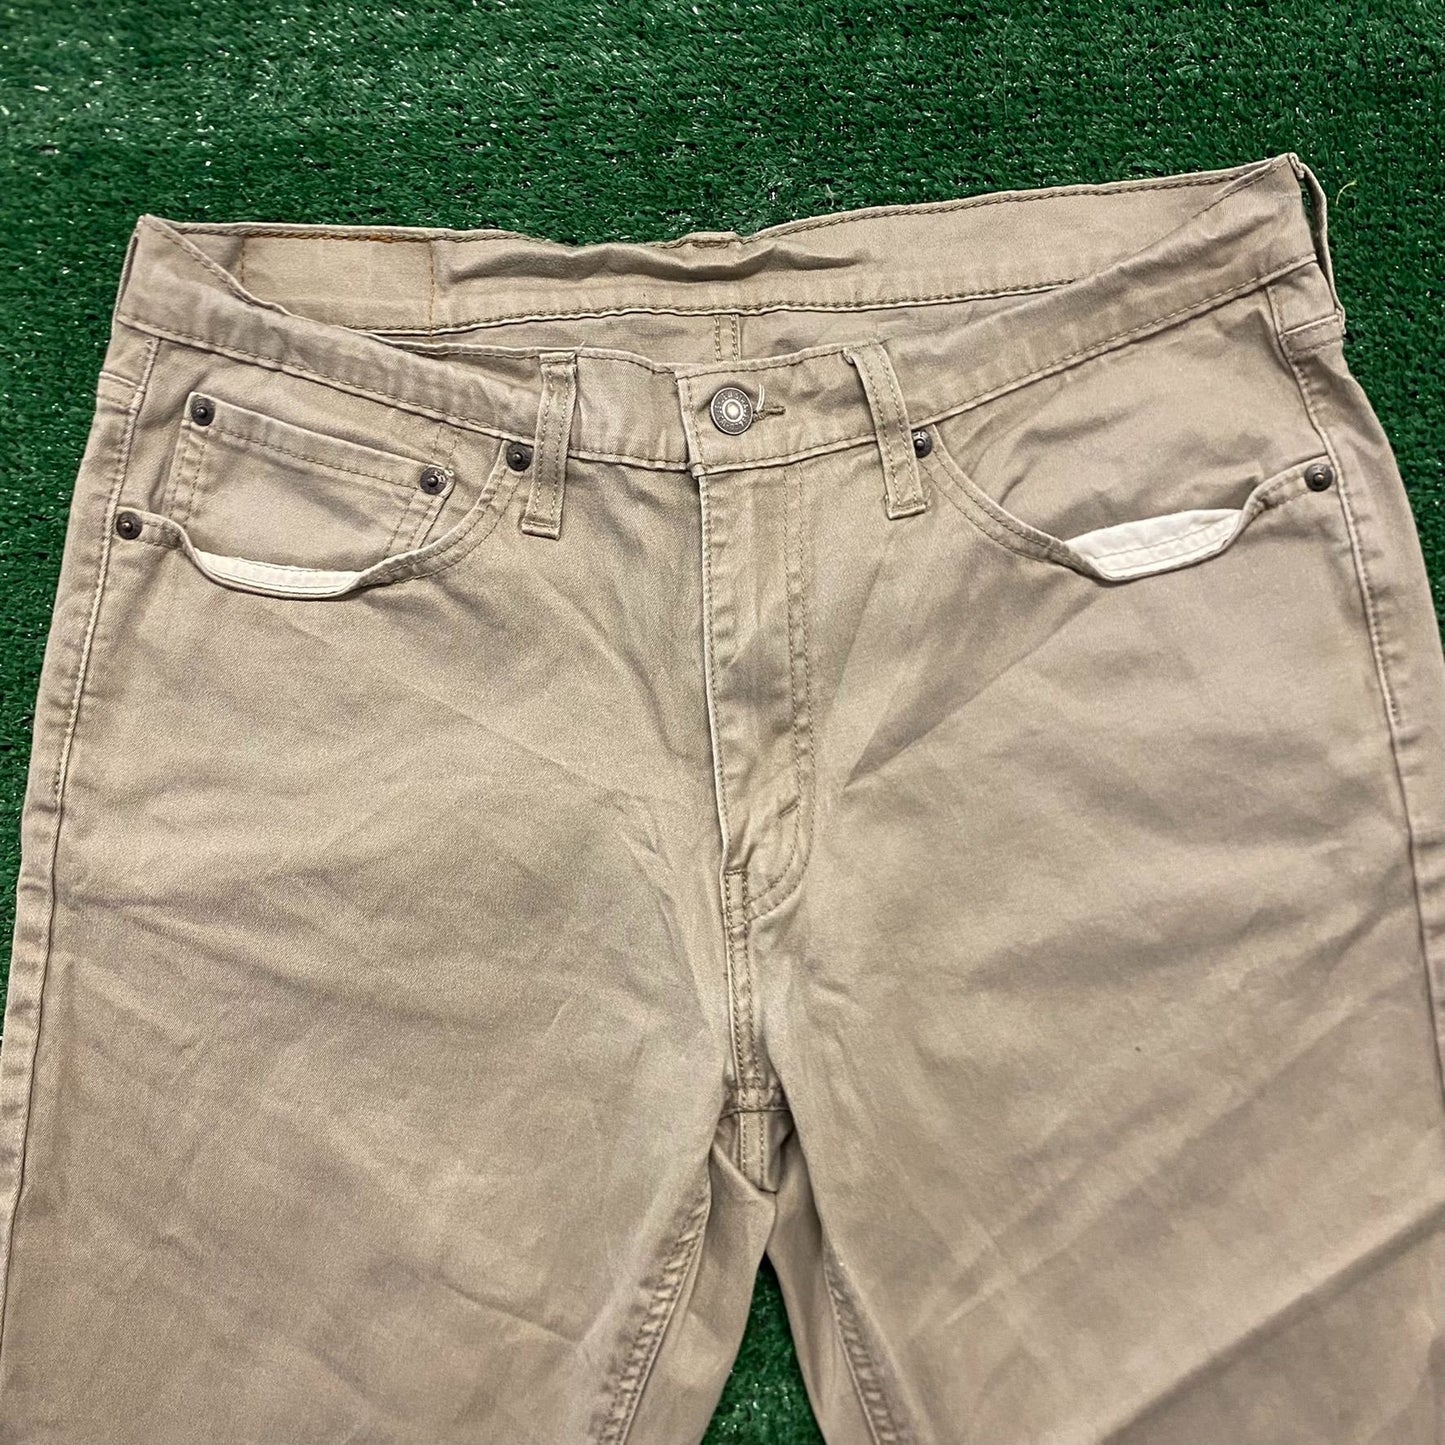 Levi's 541 Tapered Athletic Fit Vintage Khakis Chinos Pants